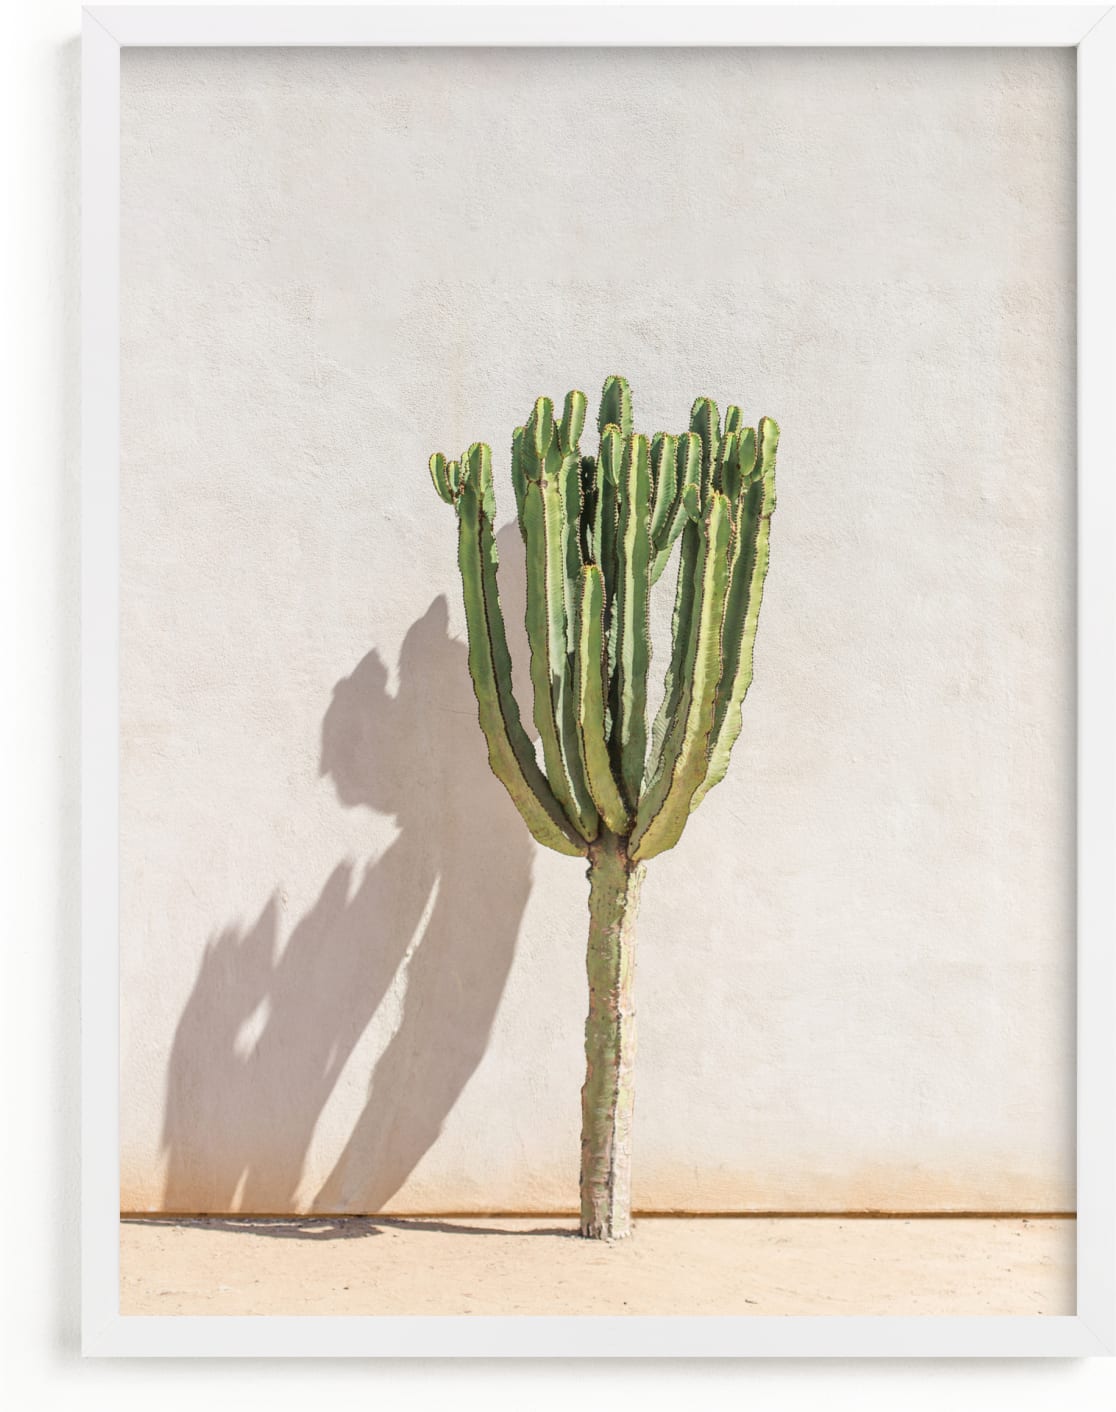 This is a white art by Olivia Kanaley Inman called Lone Cactus.